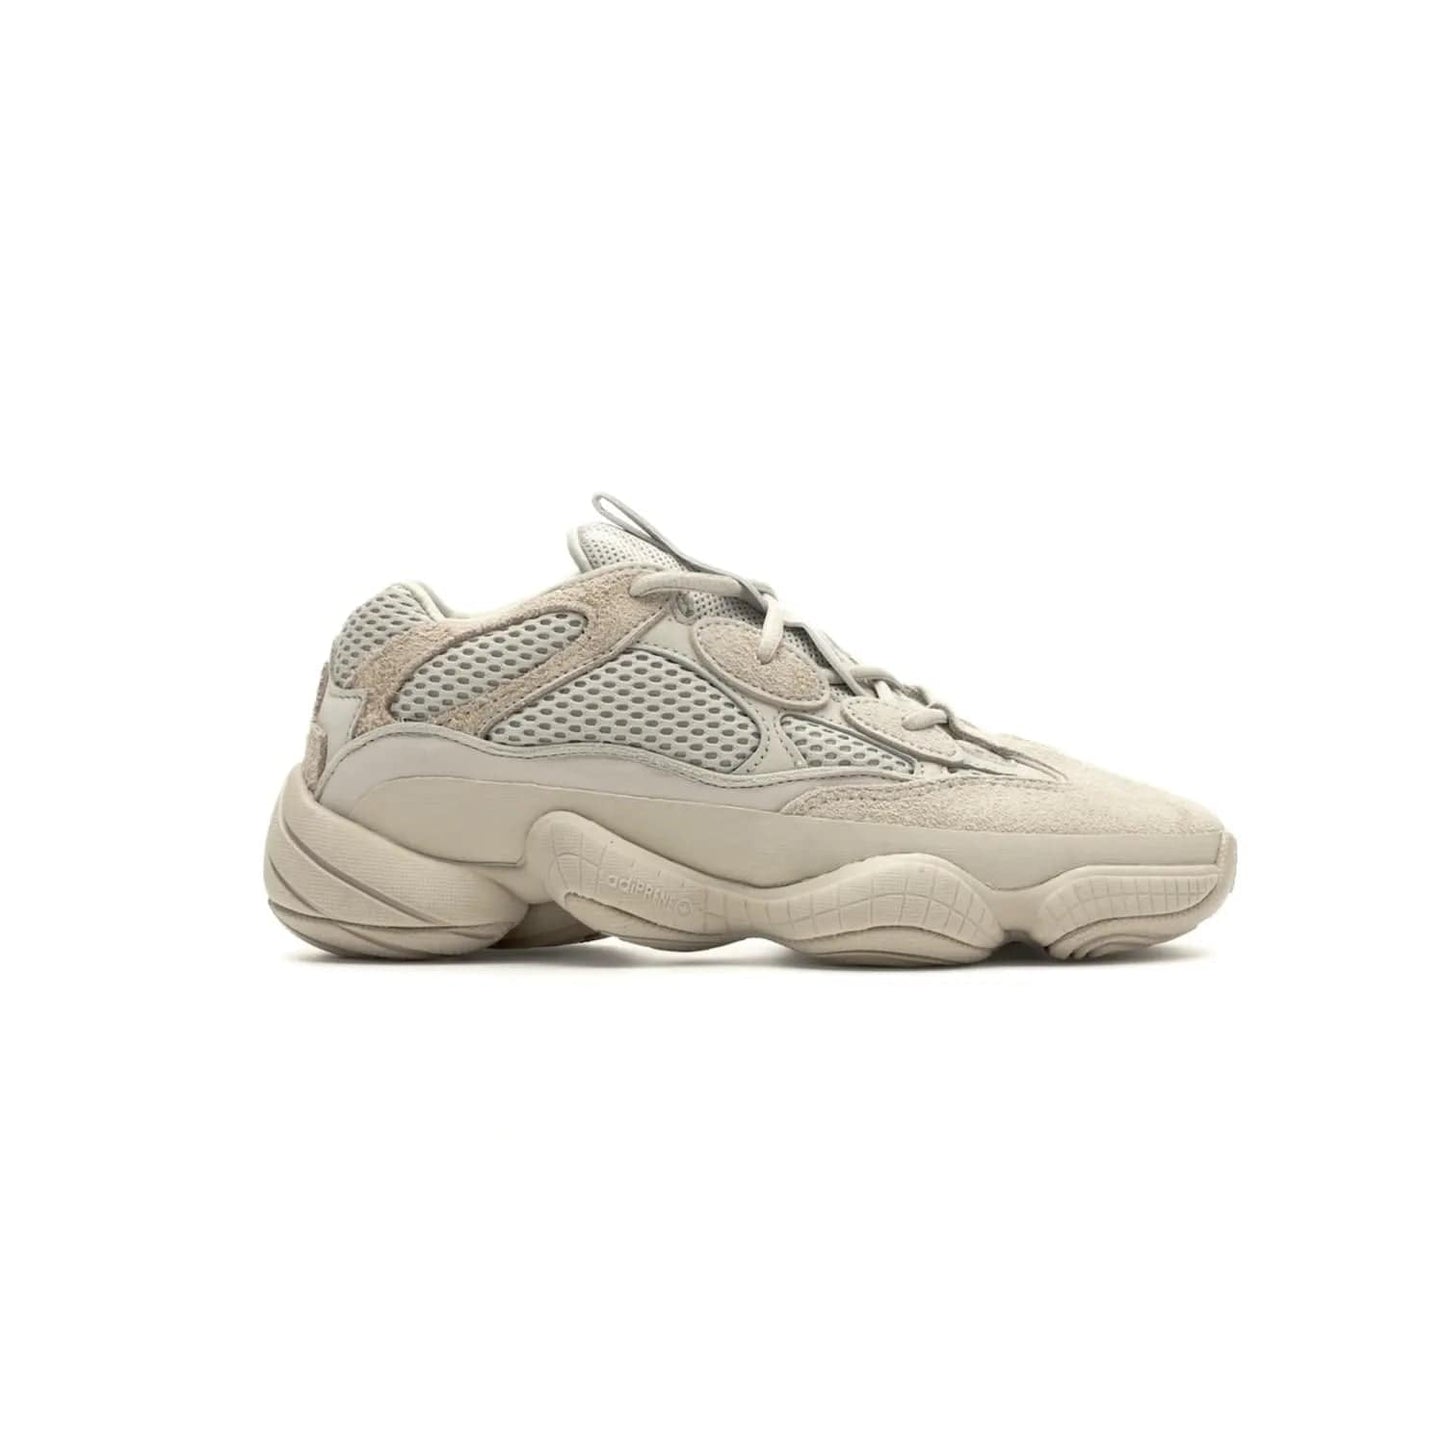 adidas Yeezy 500 Blush - Image 1 - Only at www.BallersClubKickz.com - Step up your sneaker game with the Adidas Yeezy 500 Blush. Monochromatic pale pink palette, hiking-inspired suede/mesh construction, plus adiPRENE sole for comfort and performance. Get the Adidas Yeezy 500 and experience true style and comfort.